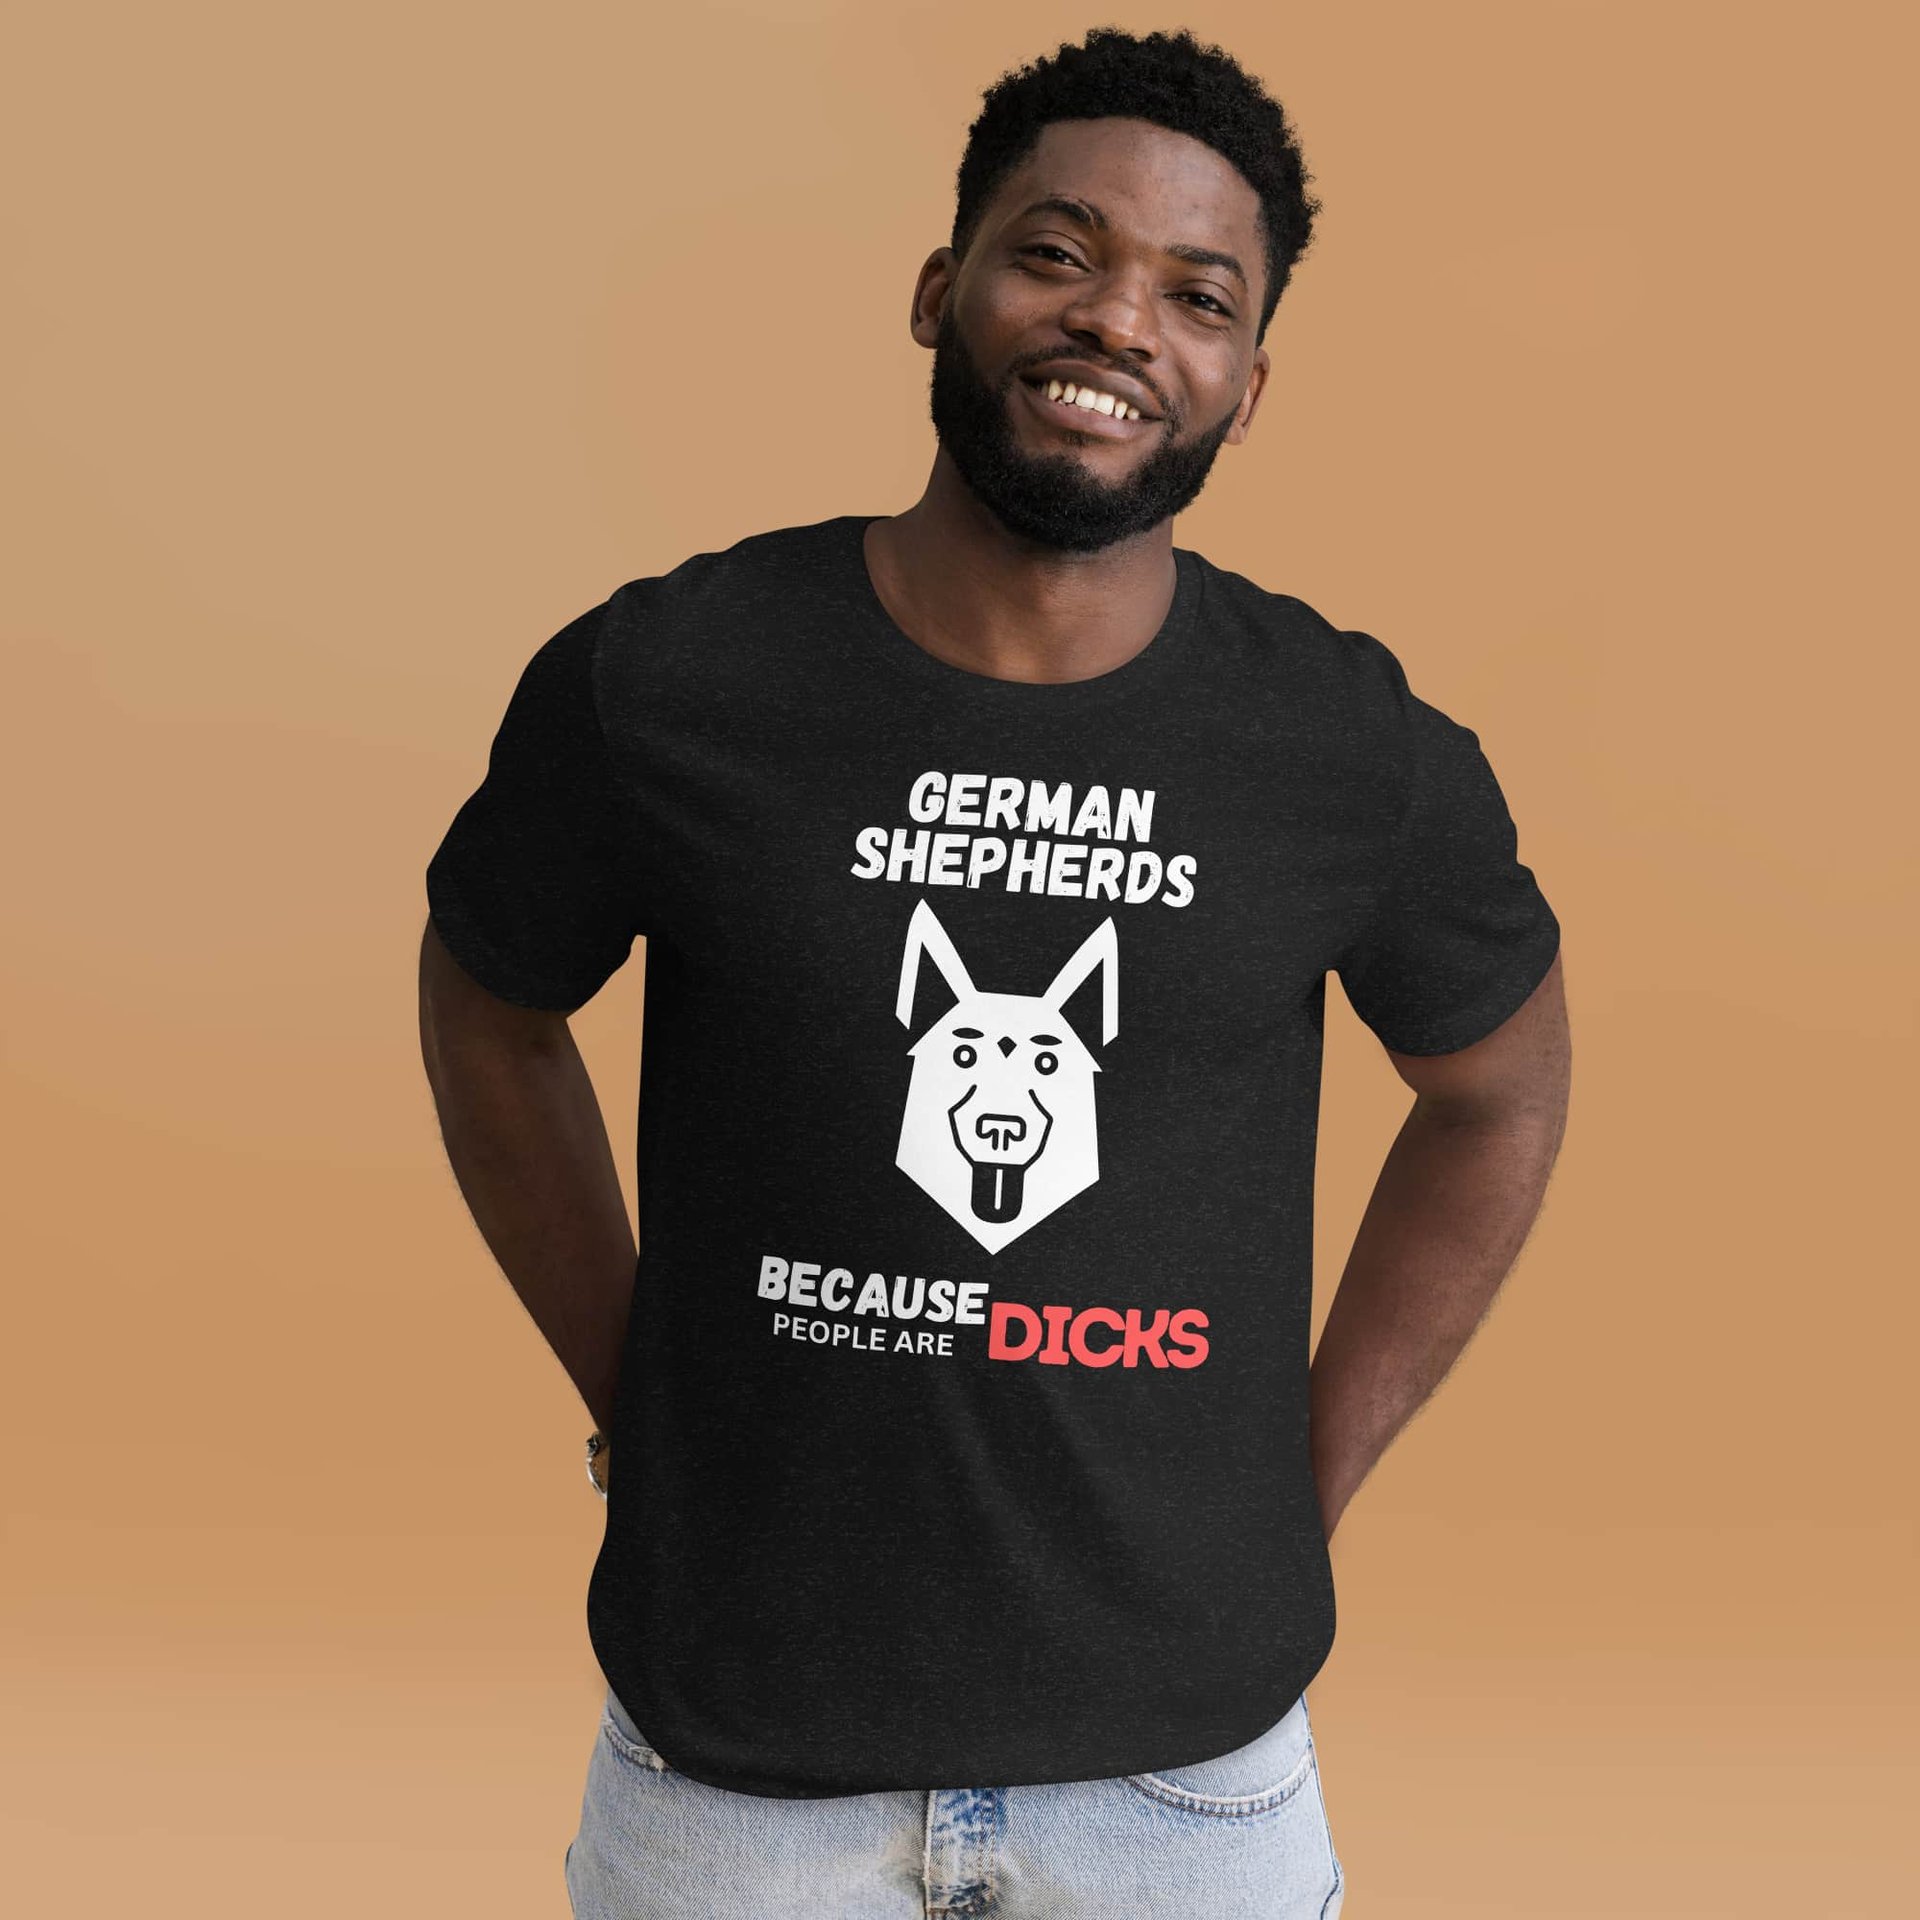 German Shepherds Because People Are Dicks Unisex T-Shirt Male T